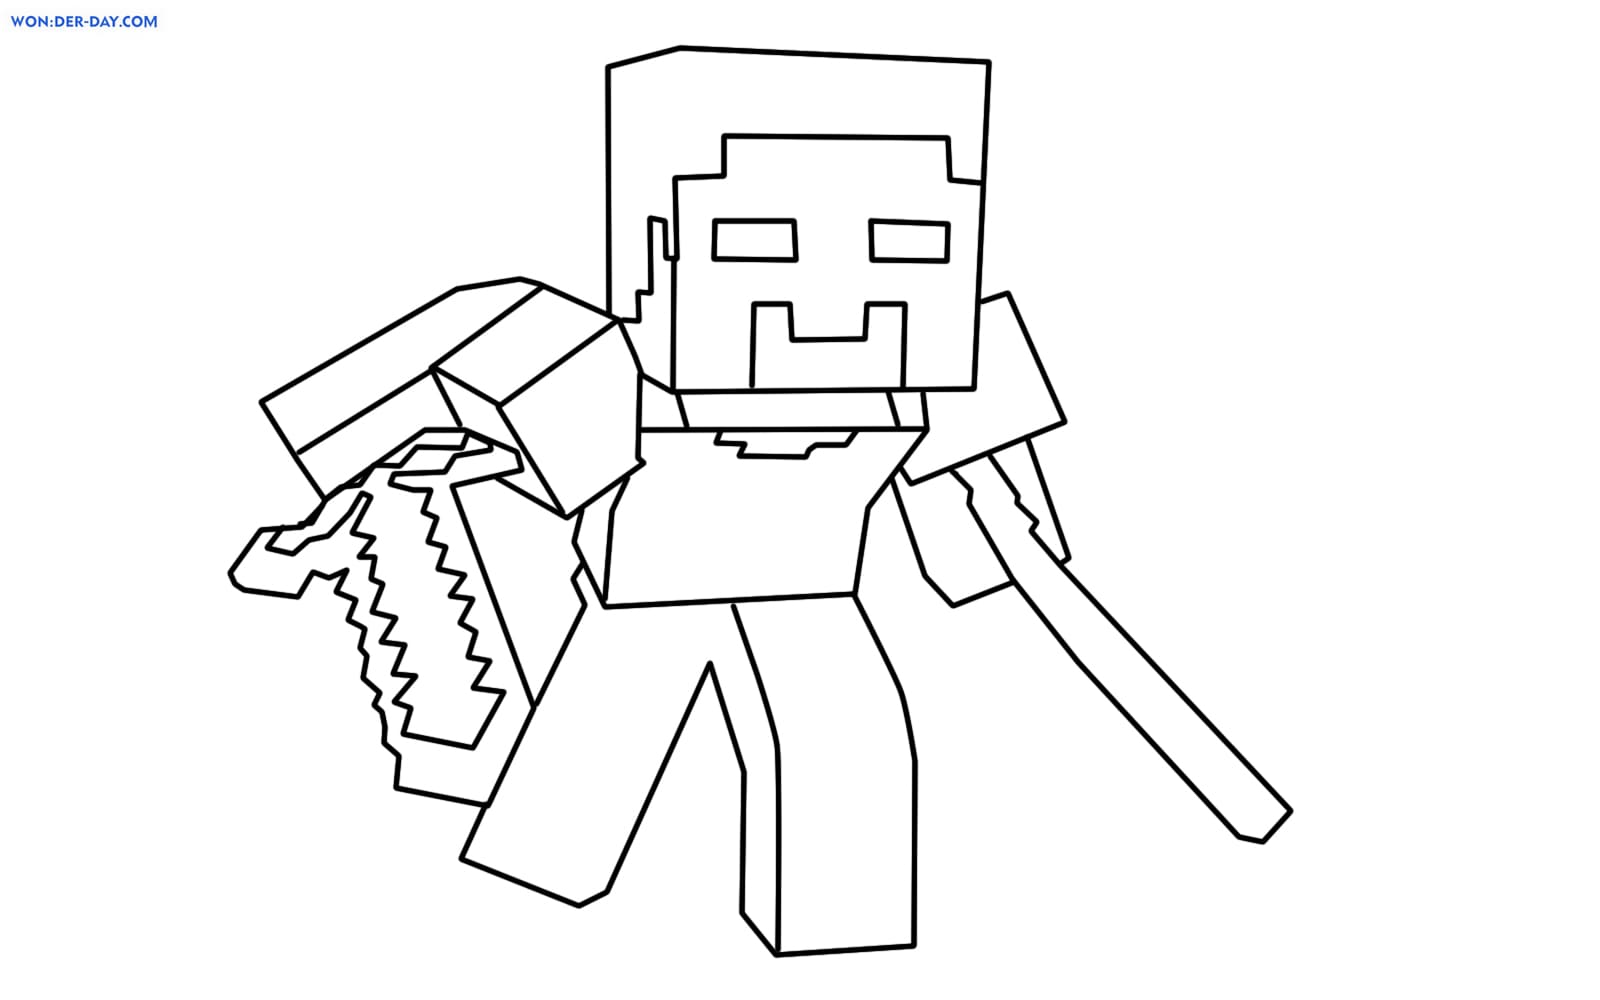 Herobrine Minecraft Coloring Pages Wonder Day Coloring Pages For Sexiz Pix